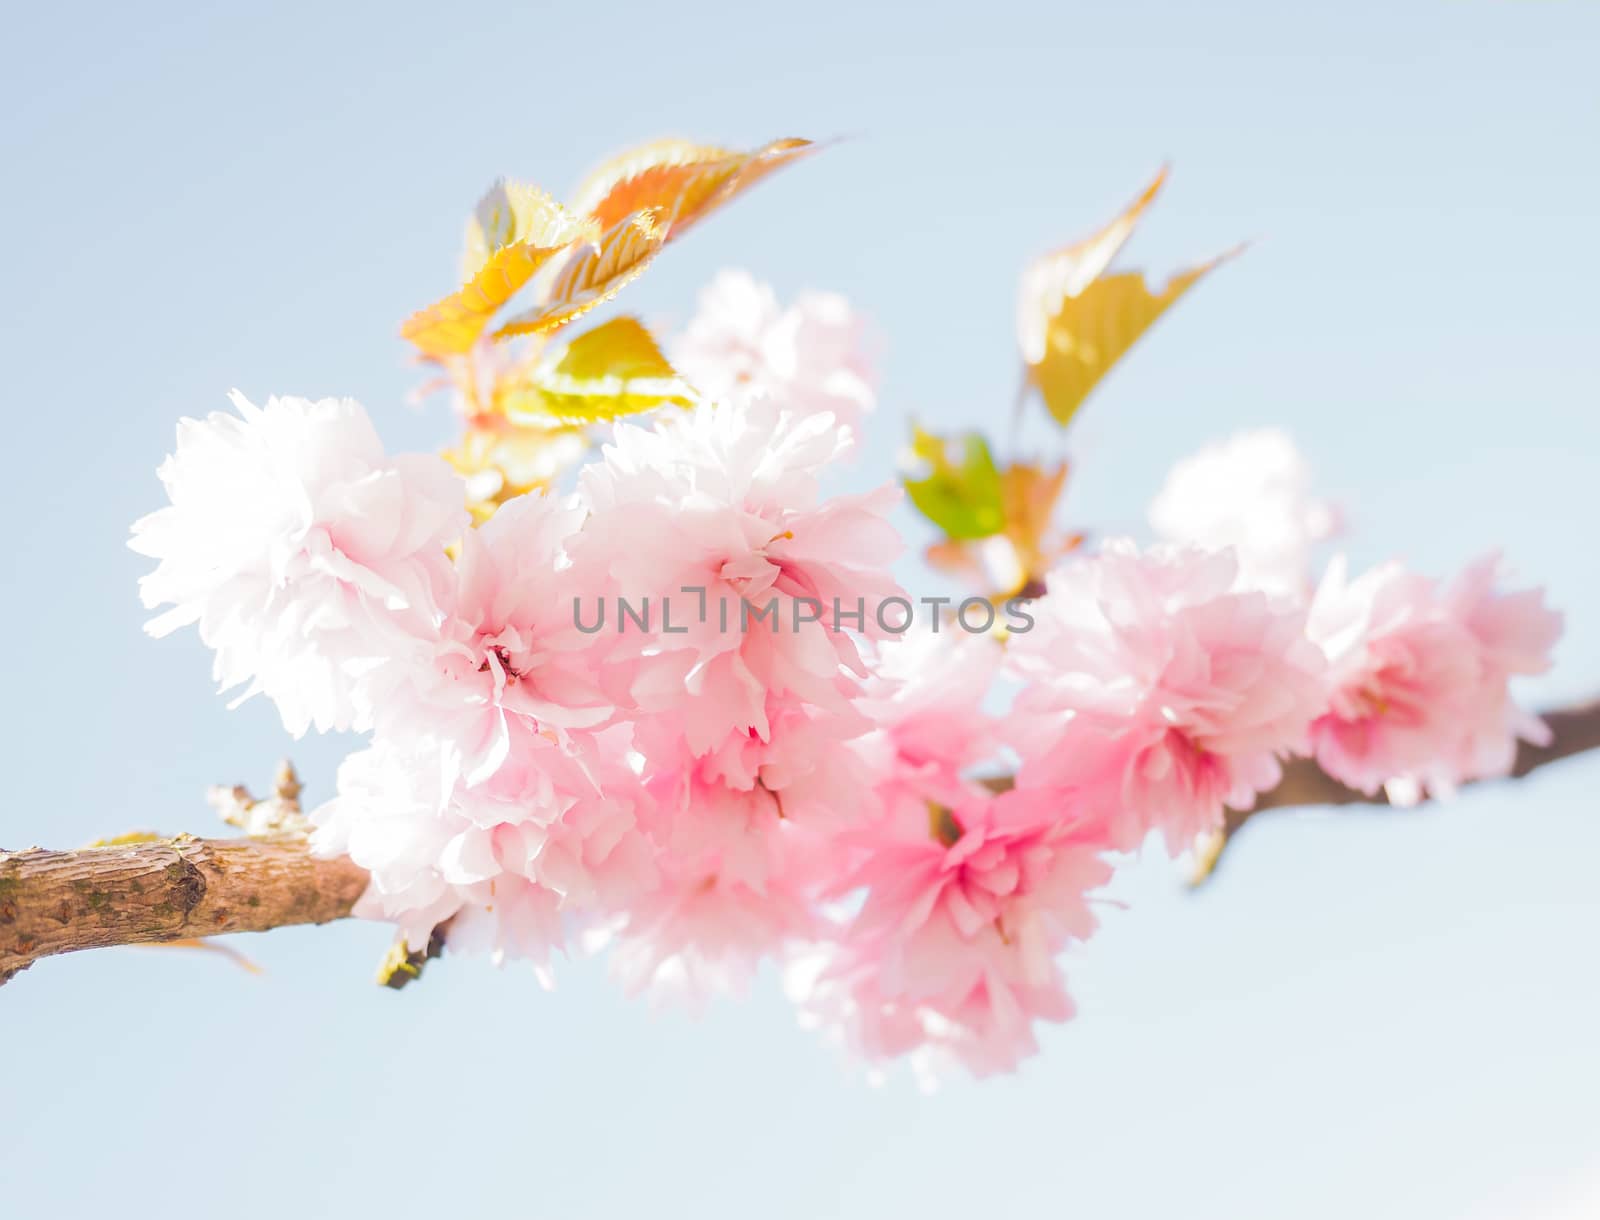 Japanese pink cherry blossoms, blooming on tree towards light blue sky